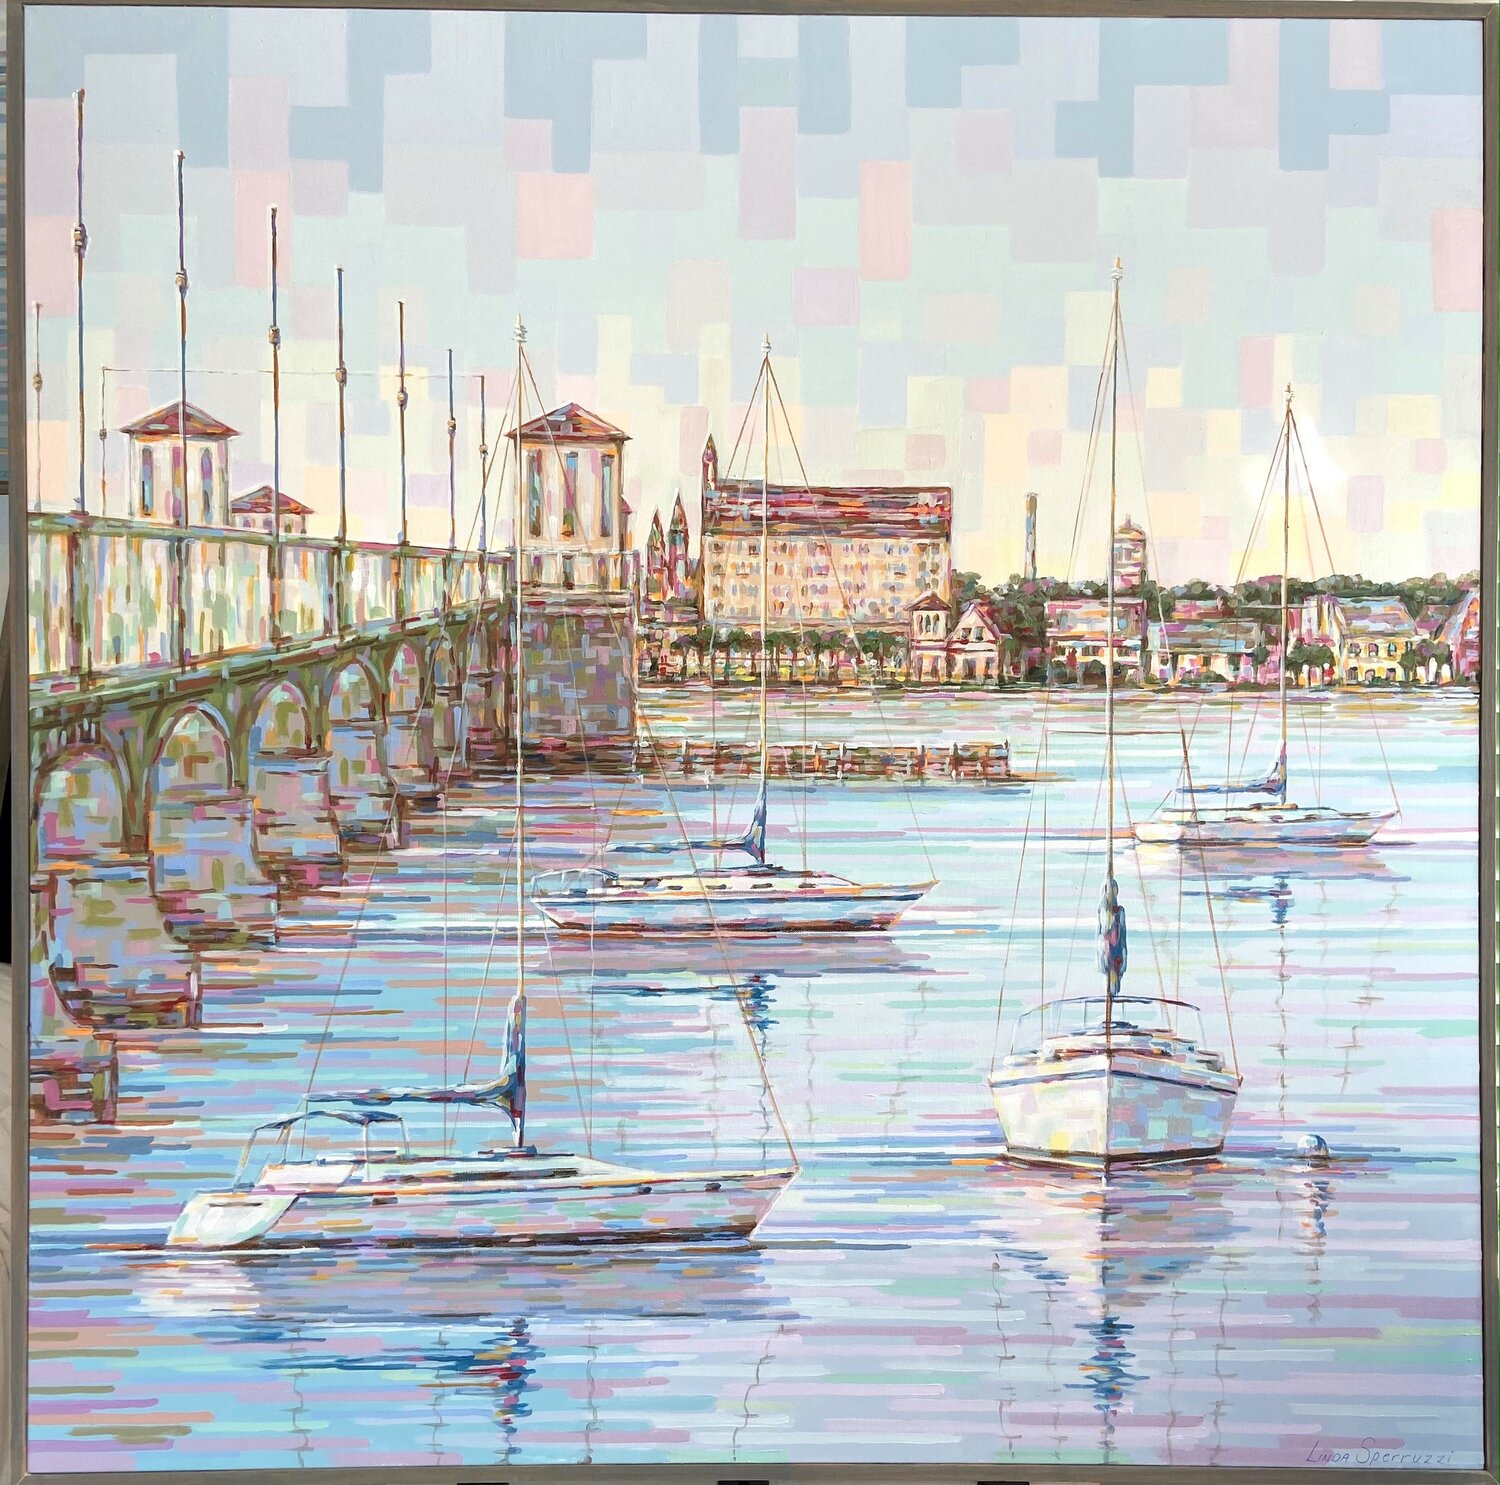 "The Colors Of The Bayfront" by Linda Sperruzzi.